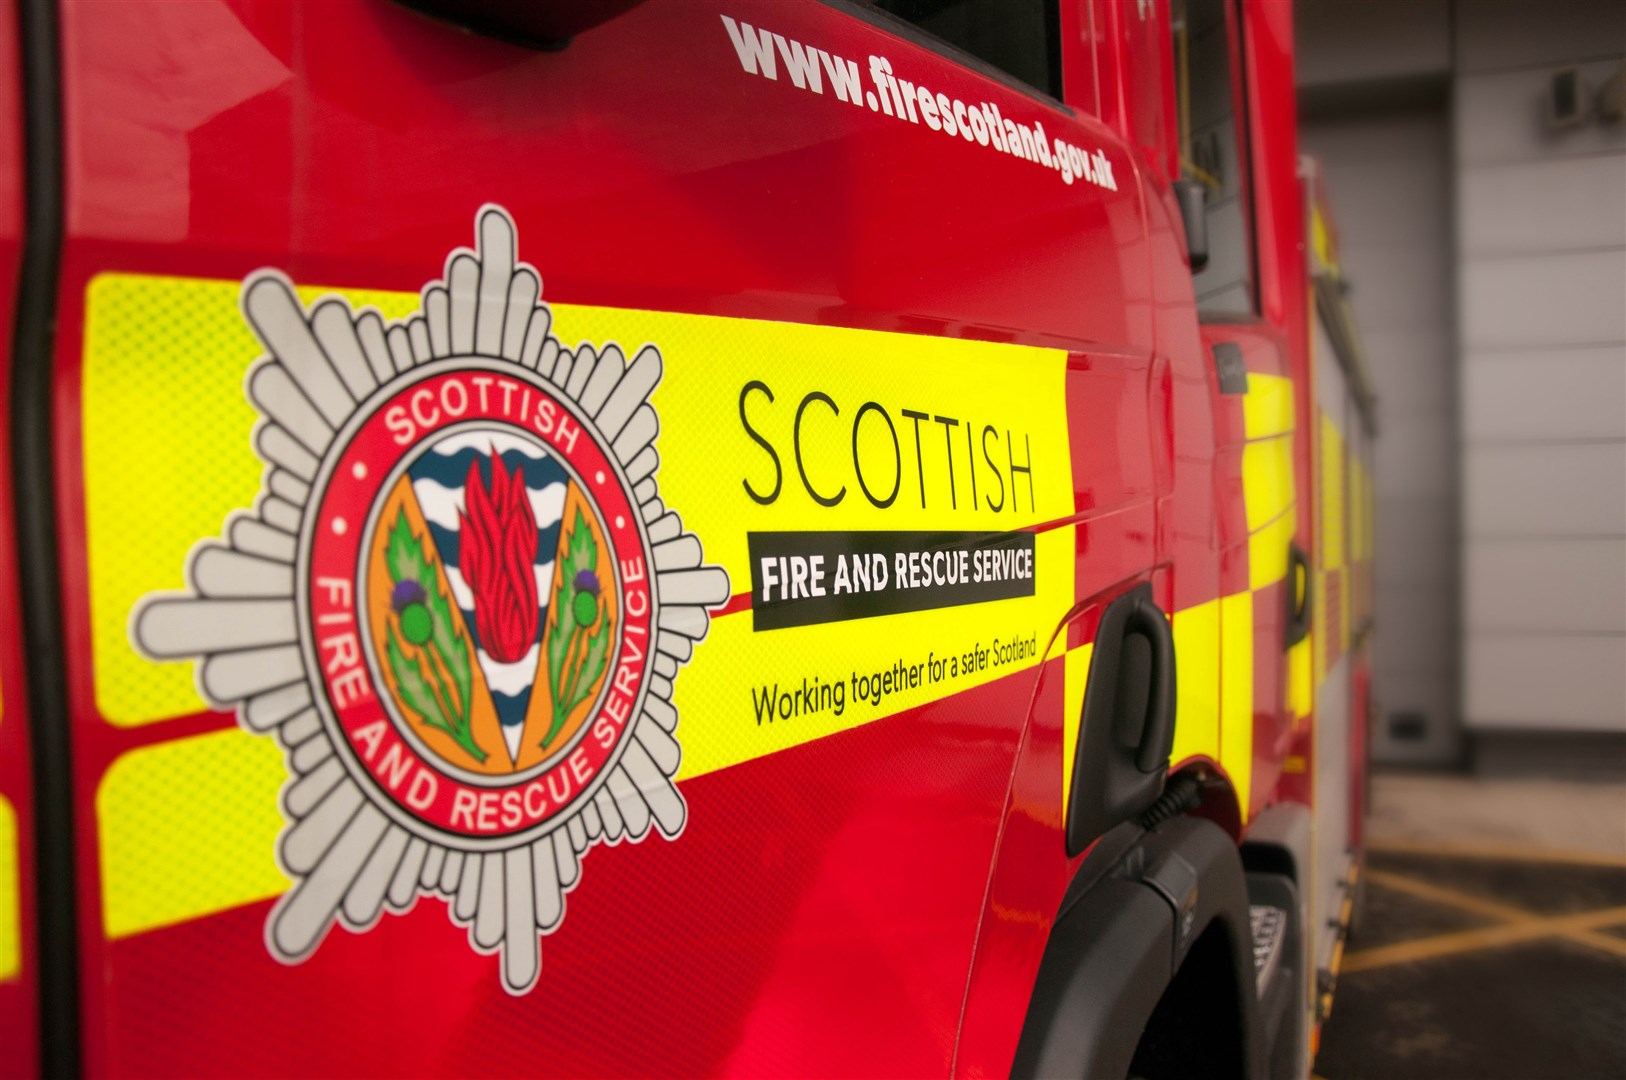 The fire service has been called out to deal with more than 15 deliberate fires near Elgin High School over the last three months.